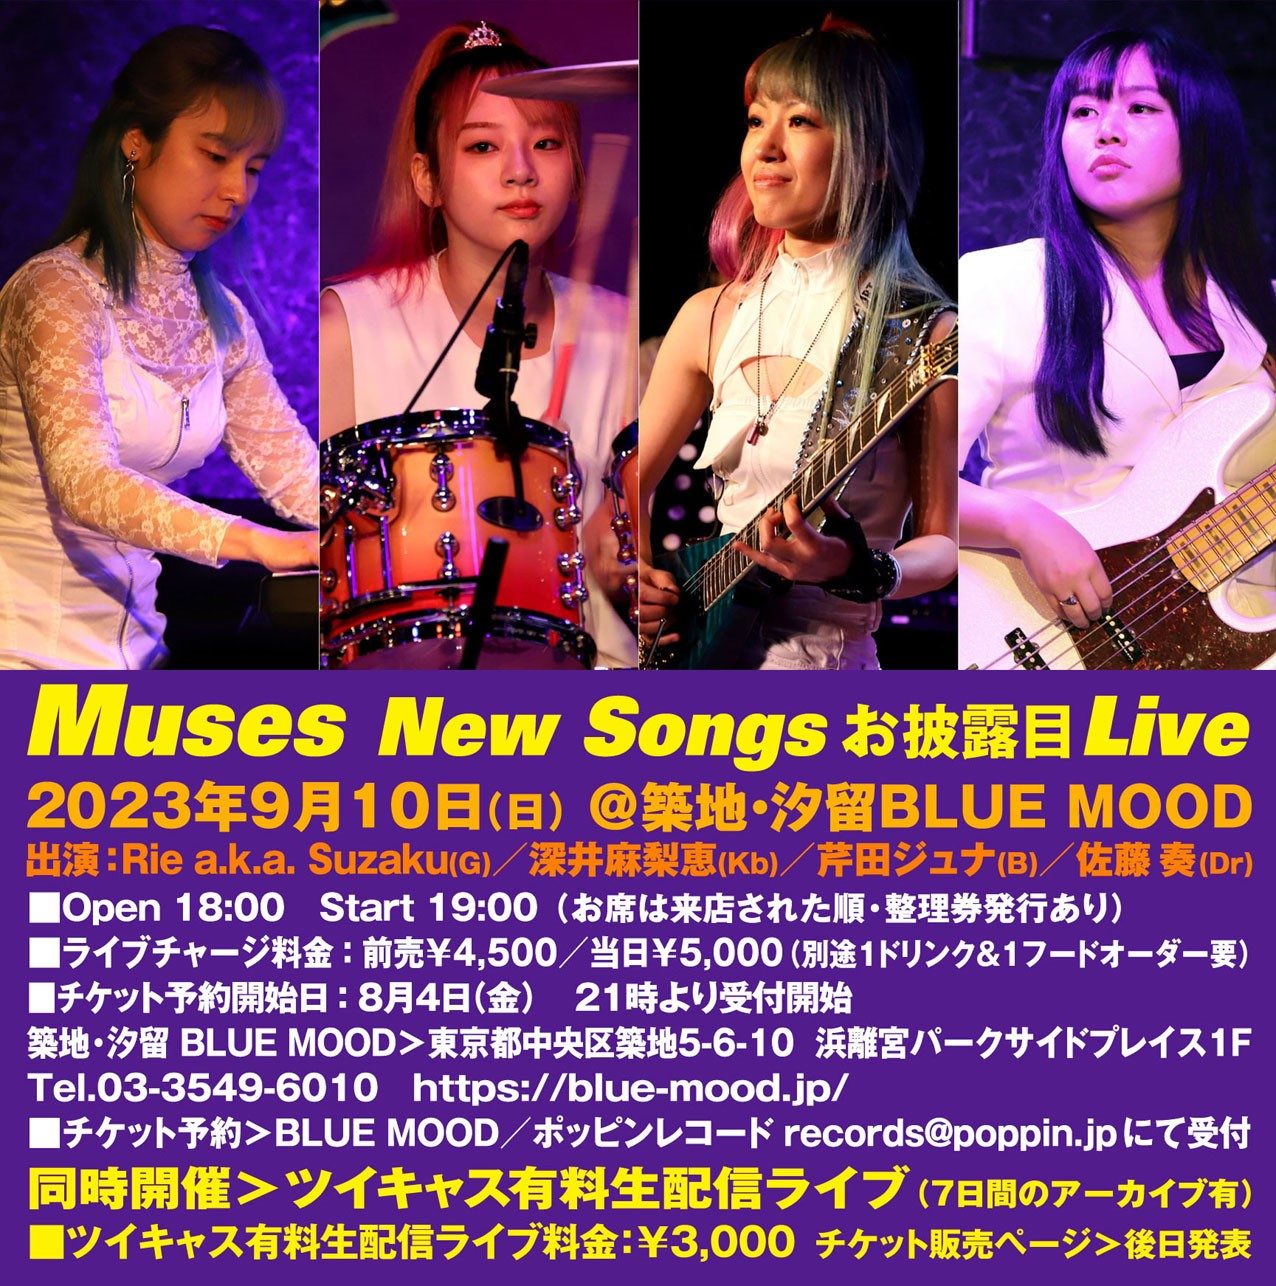 Muses New Songsお披露目 Live